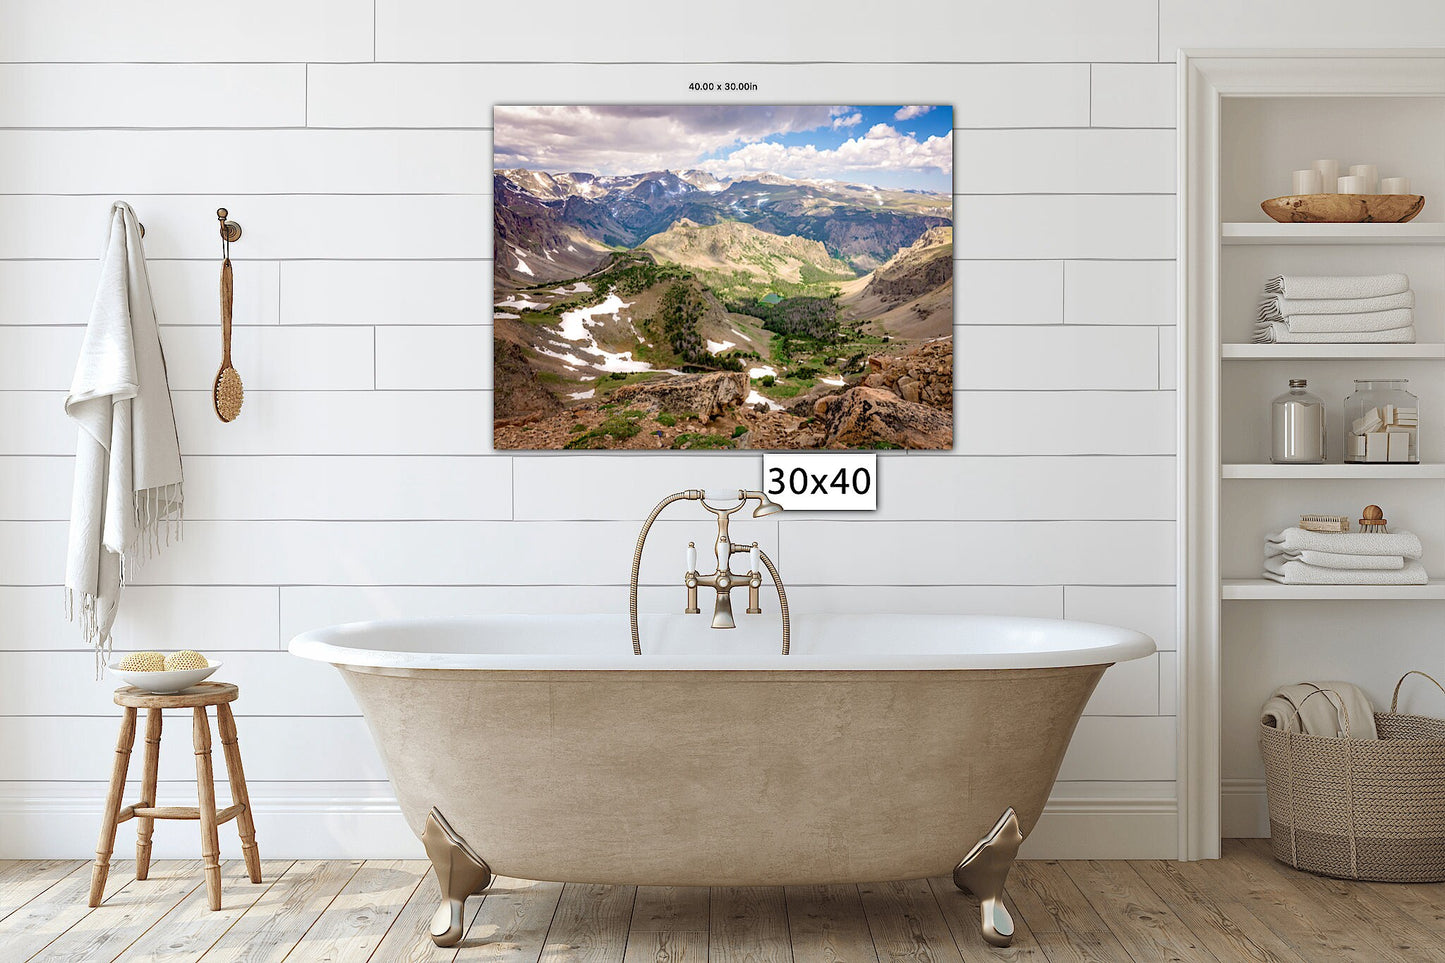 Beartooth Highway Photo, Montana Mountain Landscape, Yellowstone National Park, Large Canvas Wall Art Prints, Decor for Home and Office